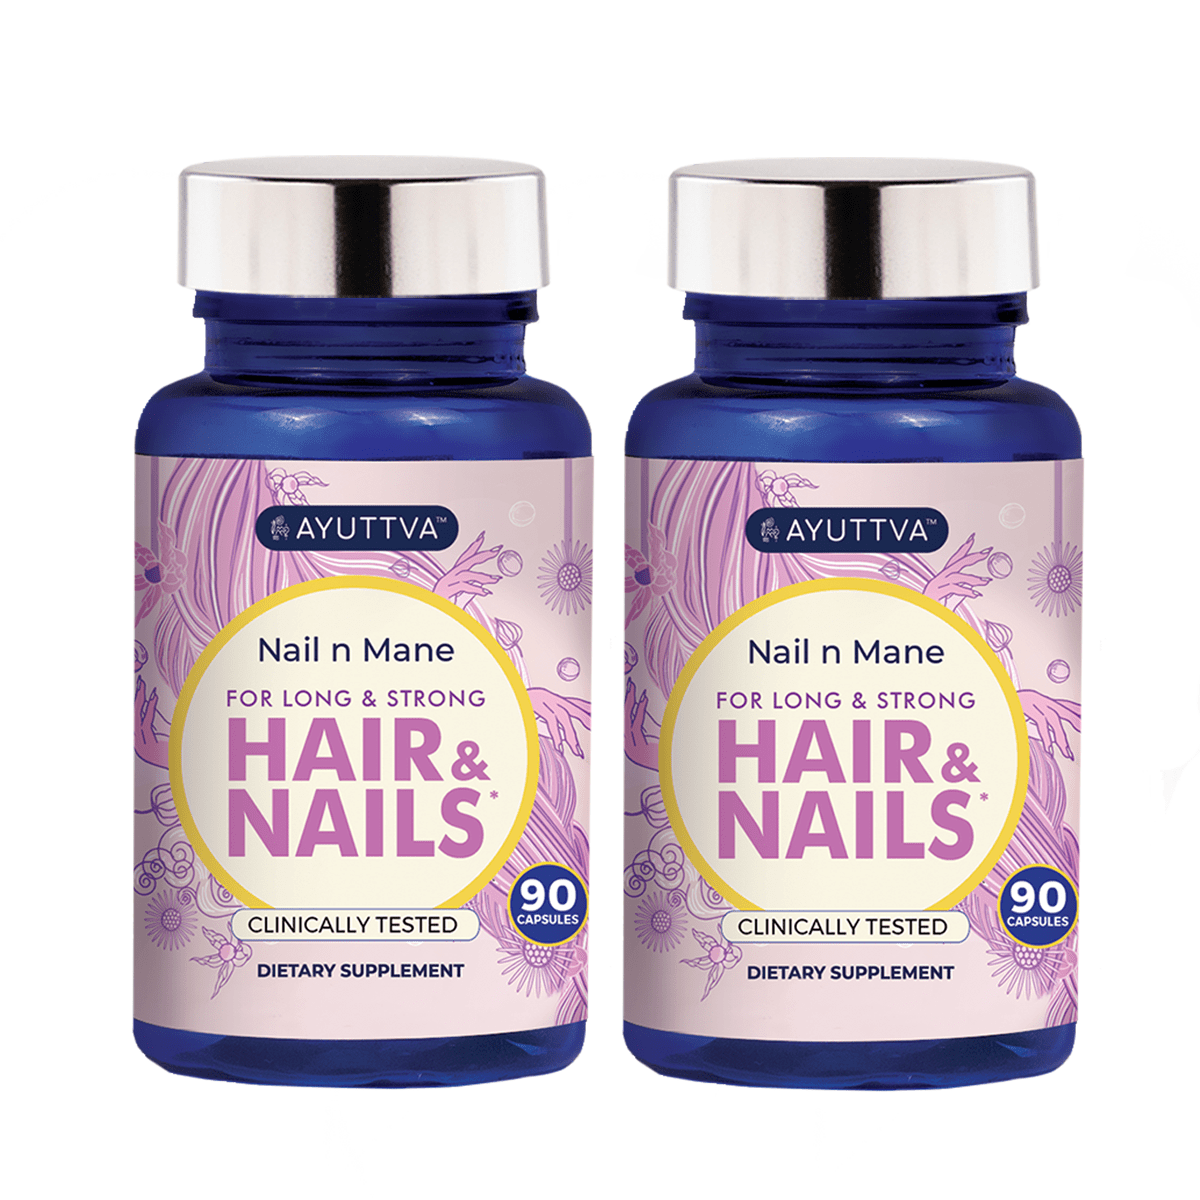 Nail n Mane - Ayurvedic Supplement for Healthy, Strong and Lustrous Hair and Nails - Pack of 2